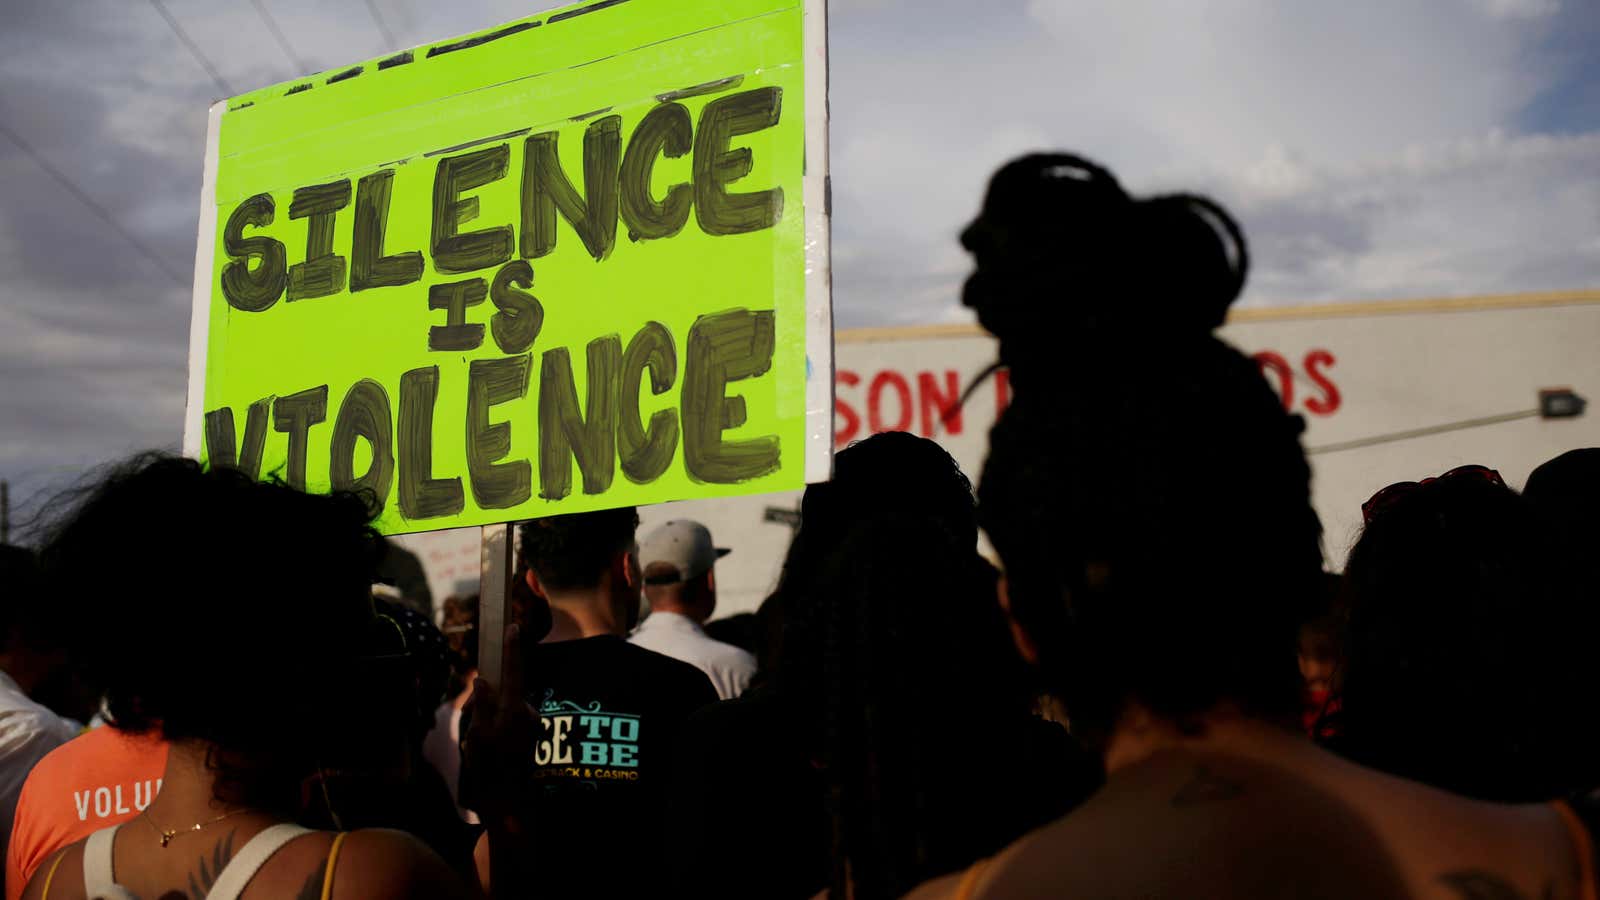 Mexican authorities have not been silent about the violence in El Paso, Texas.